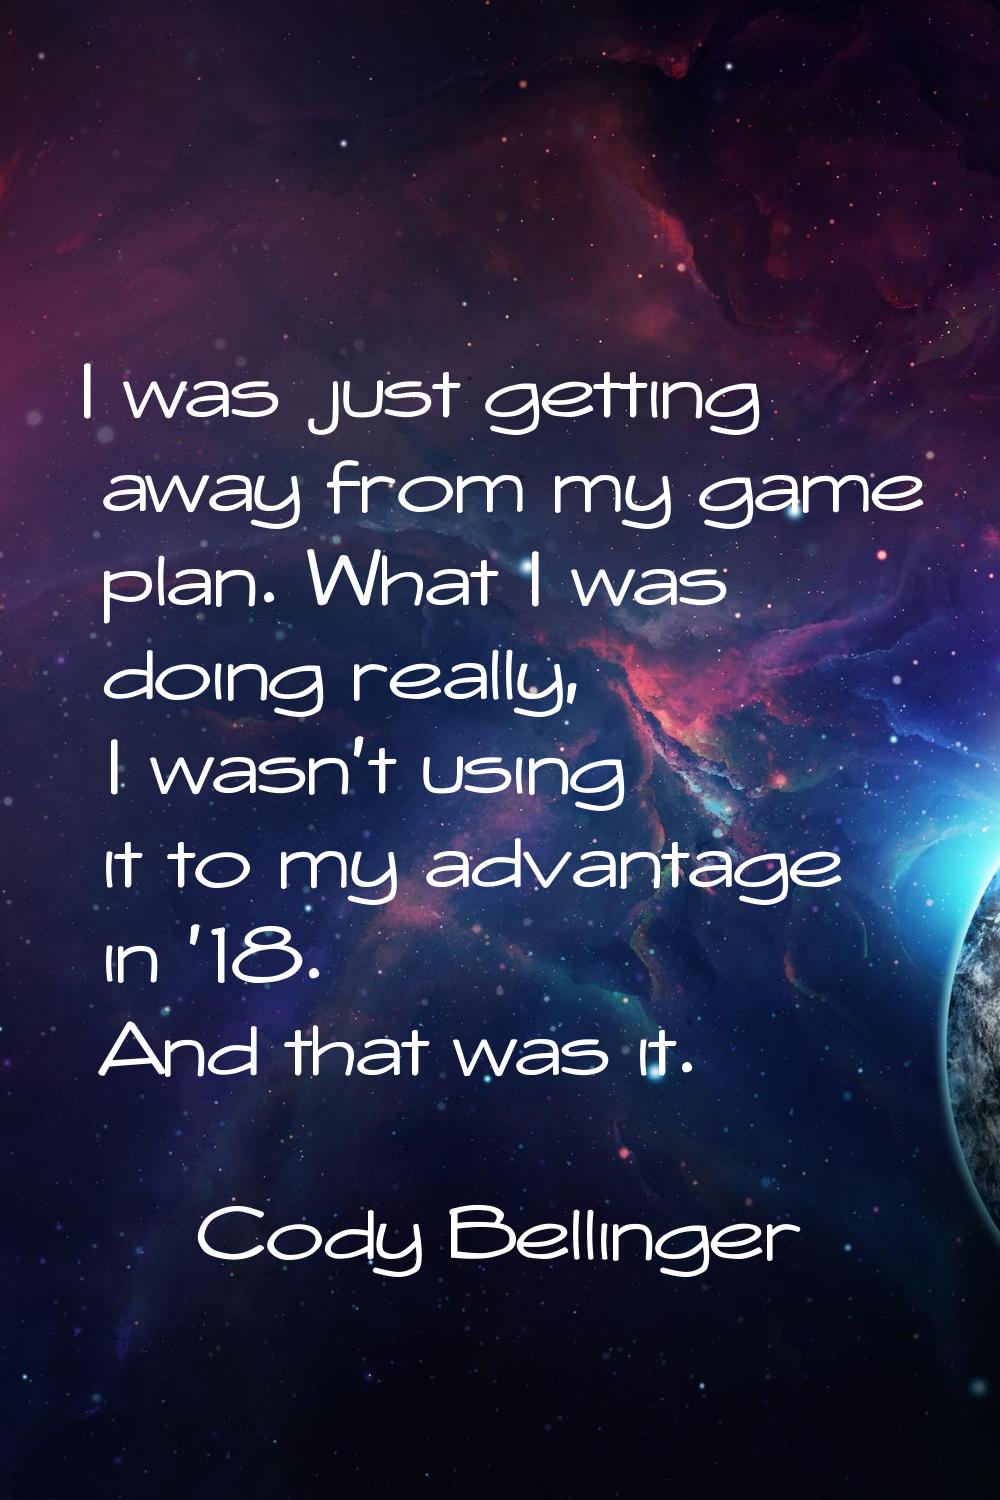 I was just getting away from my game plan. What I was doing really, I wasn't using it to my advanta